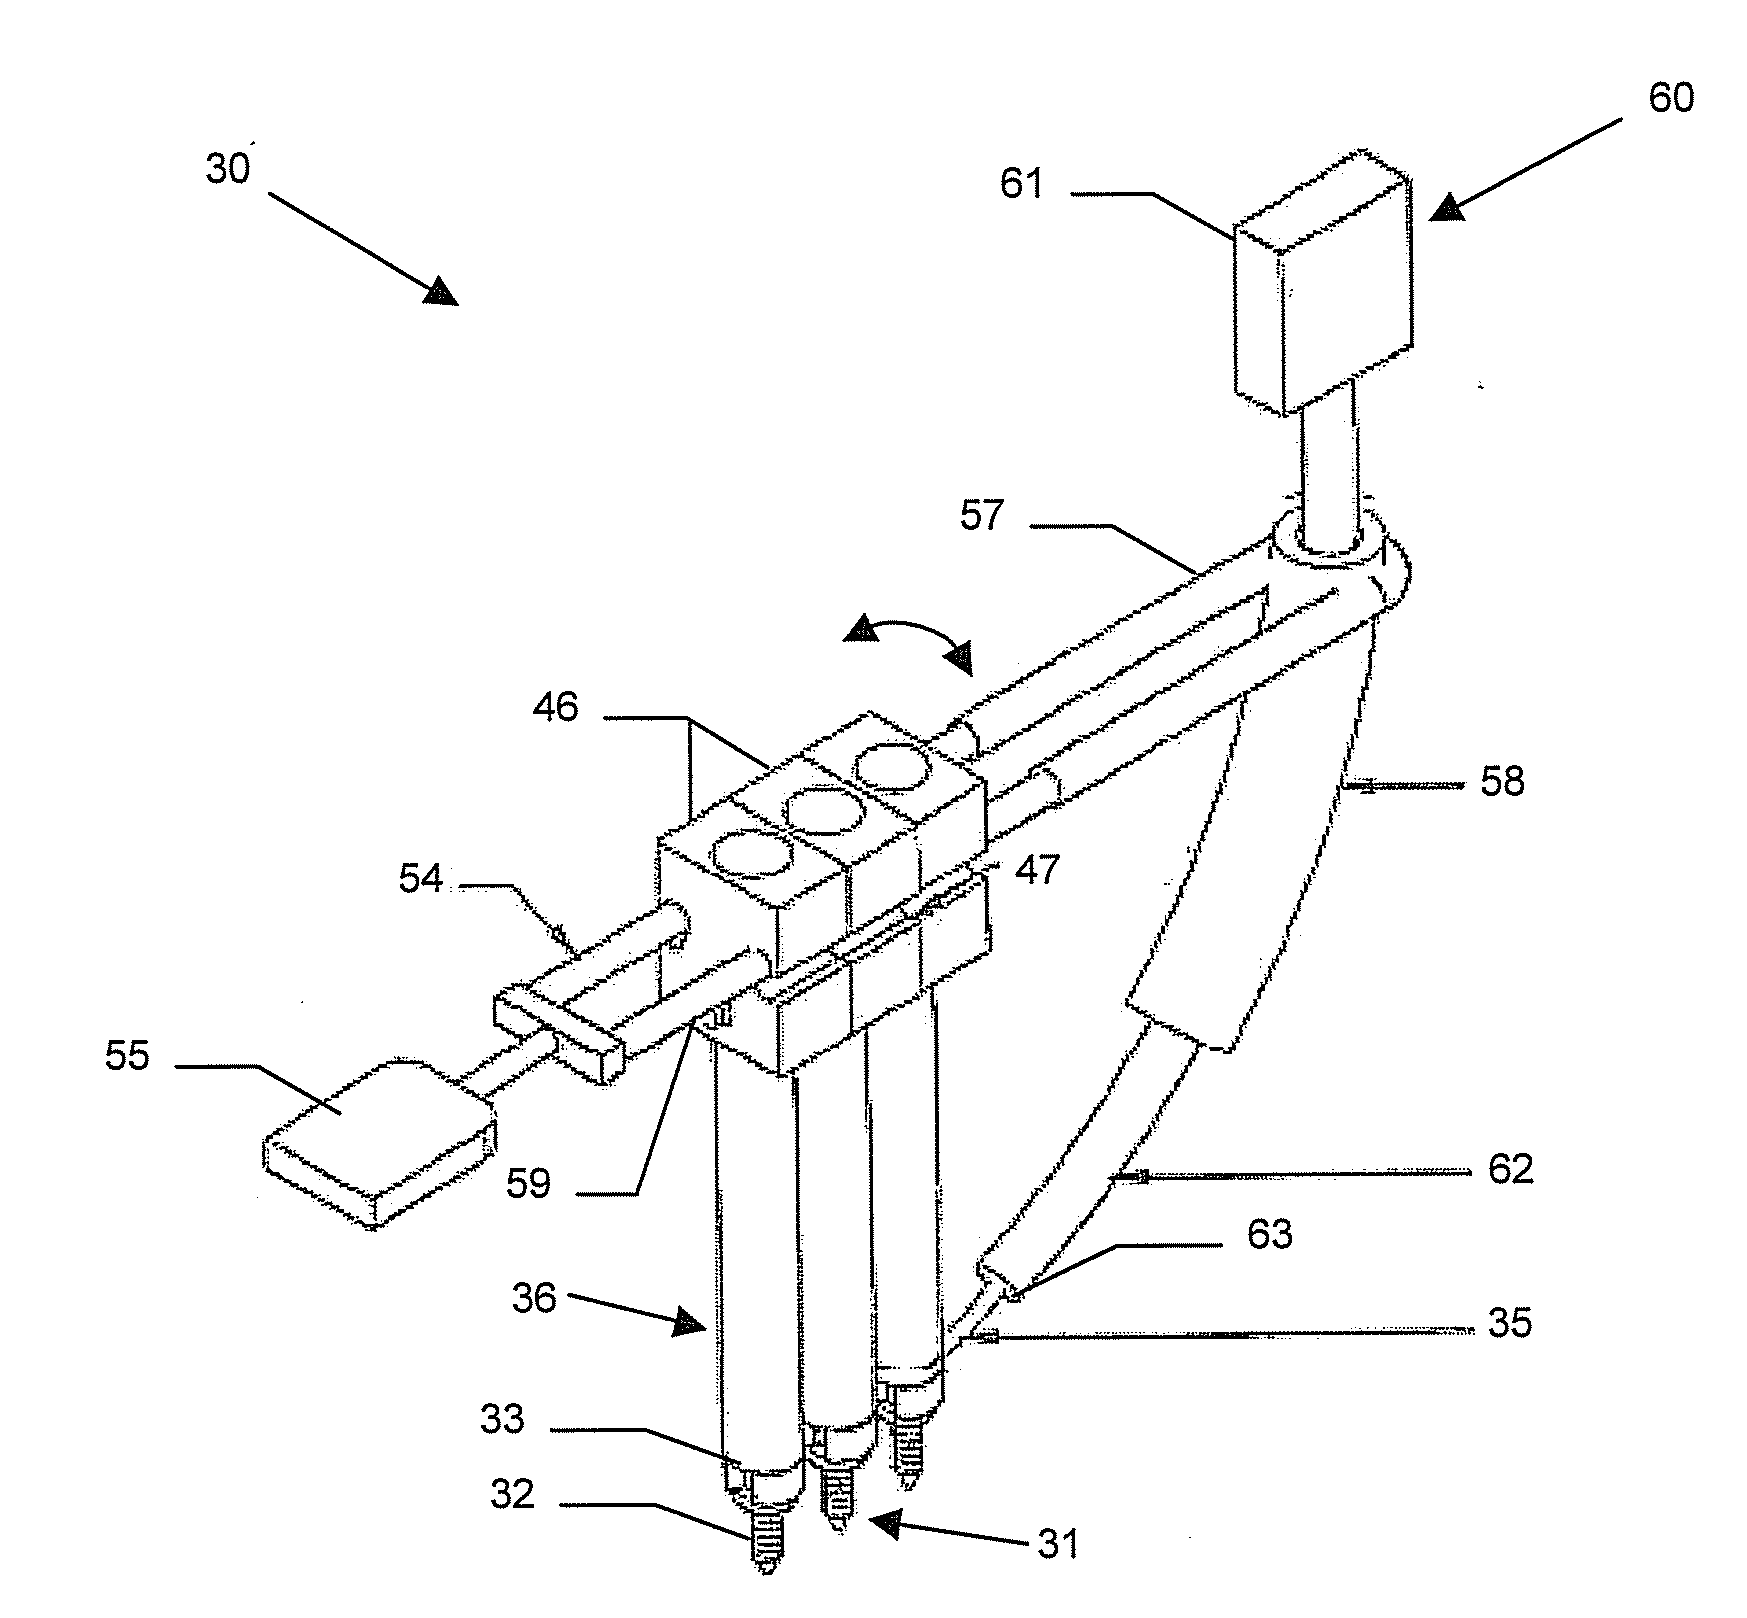 Percutaneous spinal rod insertion system and related methods